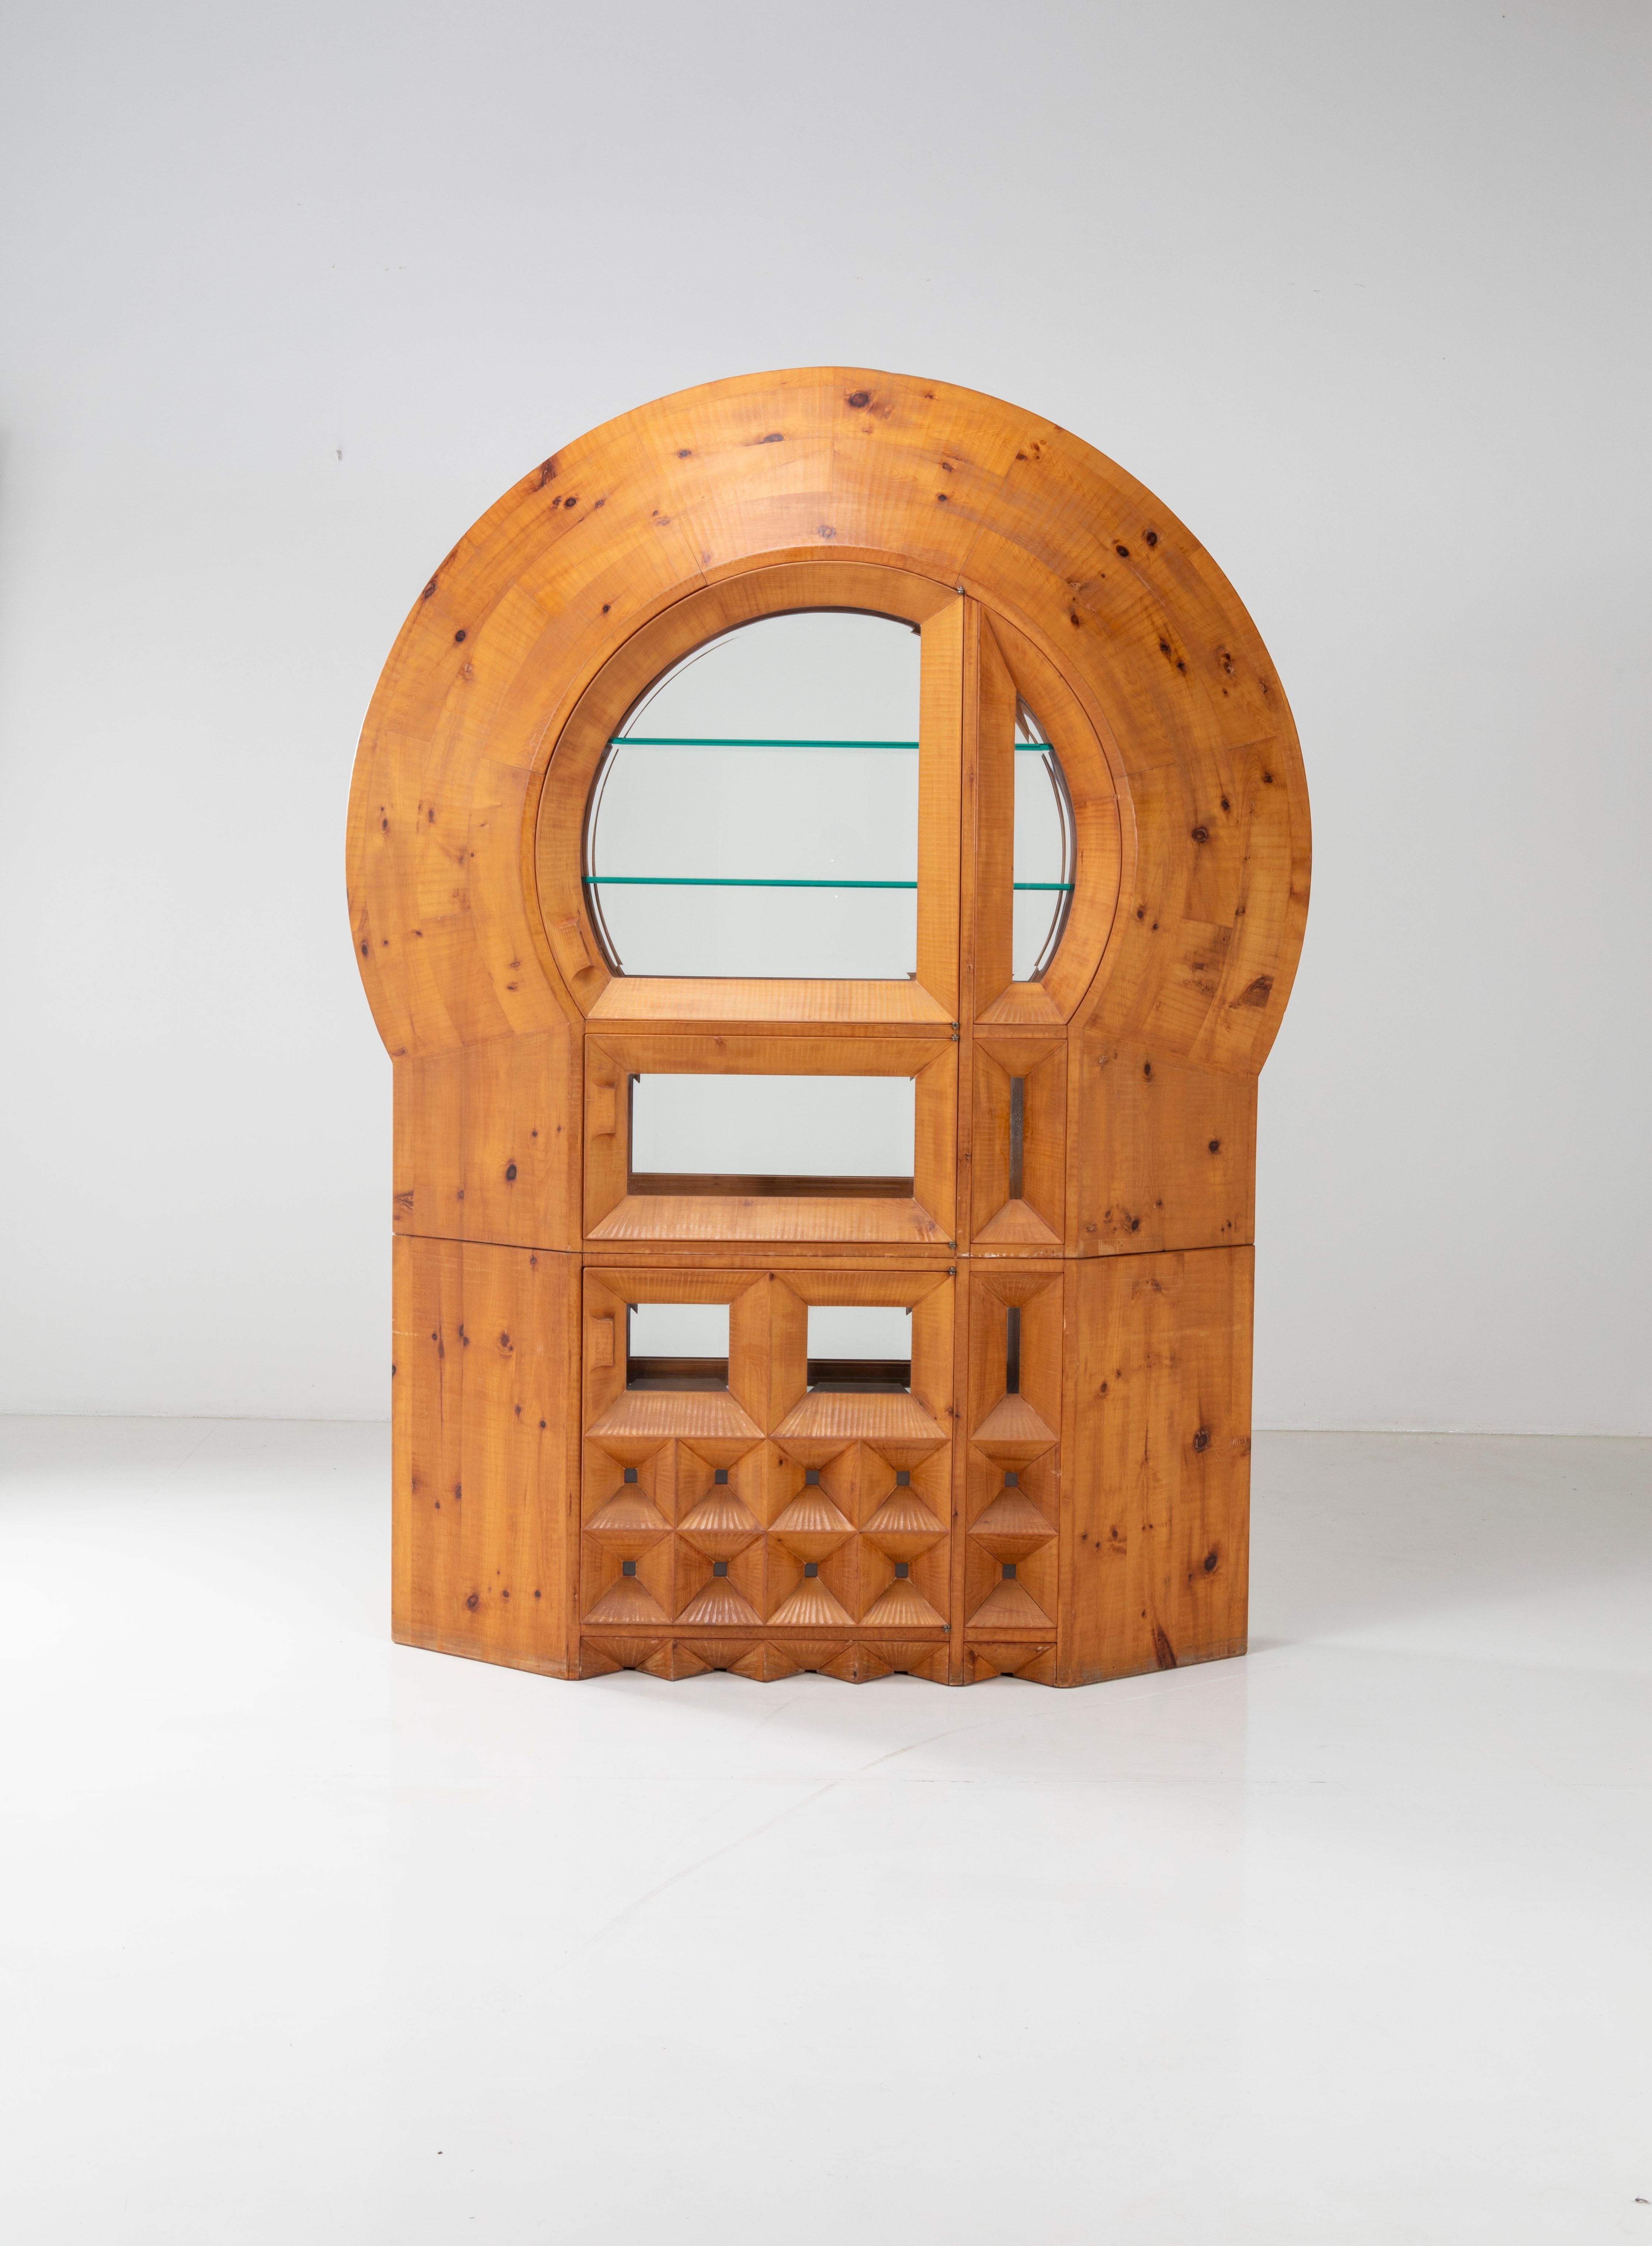 This is a unique, material, impressive and extremely decorative bar cabinet. The wood, reminiscent of the mountains, is hand-finished and the chisel grooves can be seen distinctly enriching the outline. The glass windows with the two doors, in the